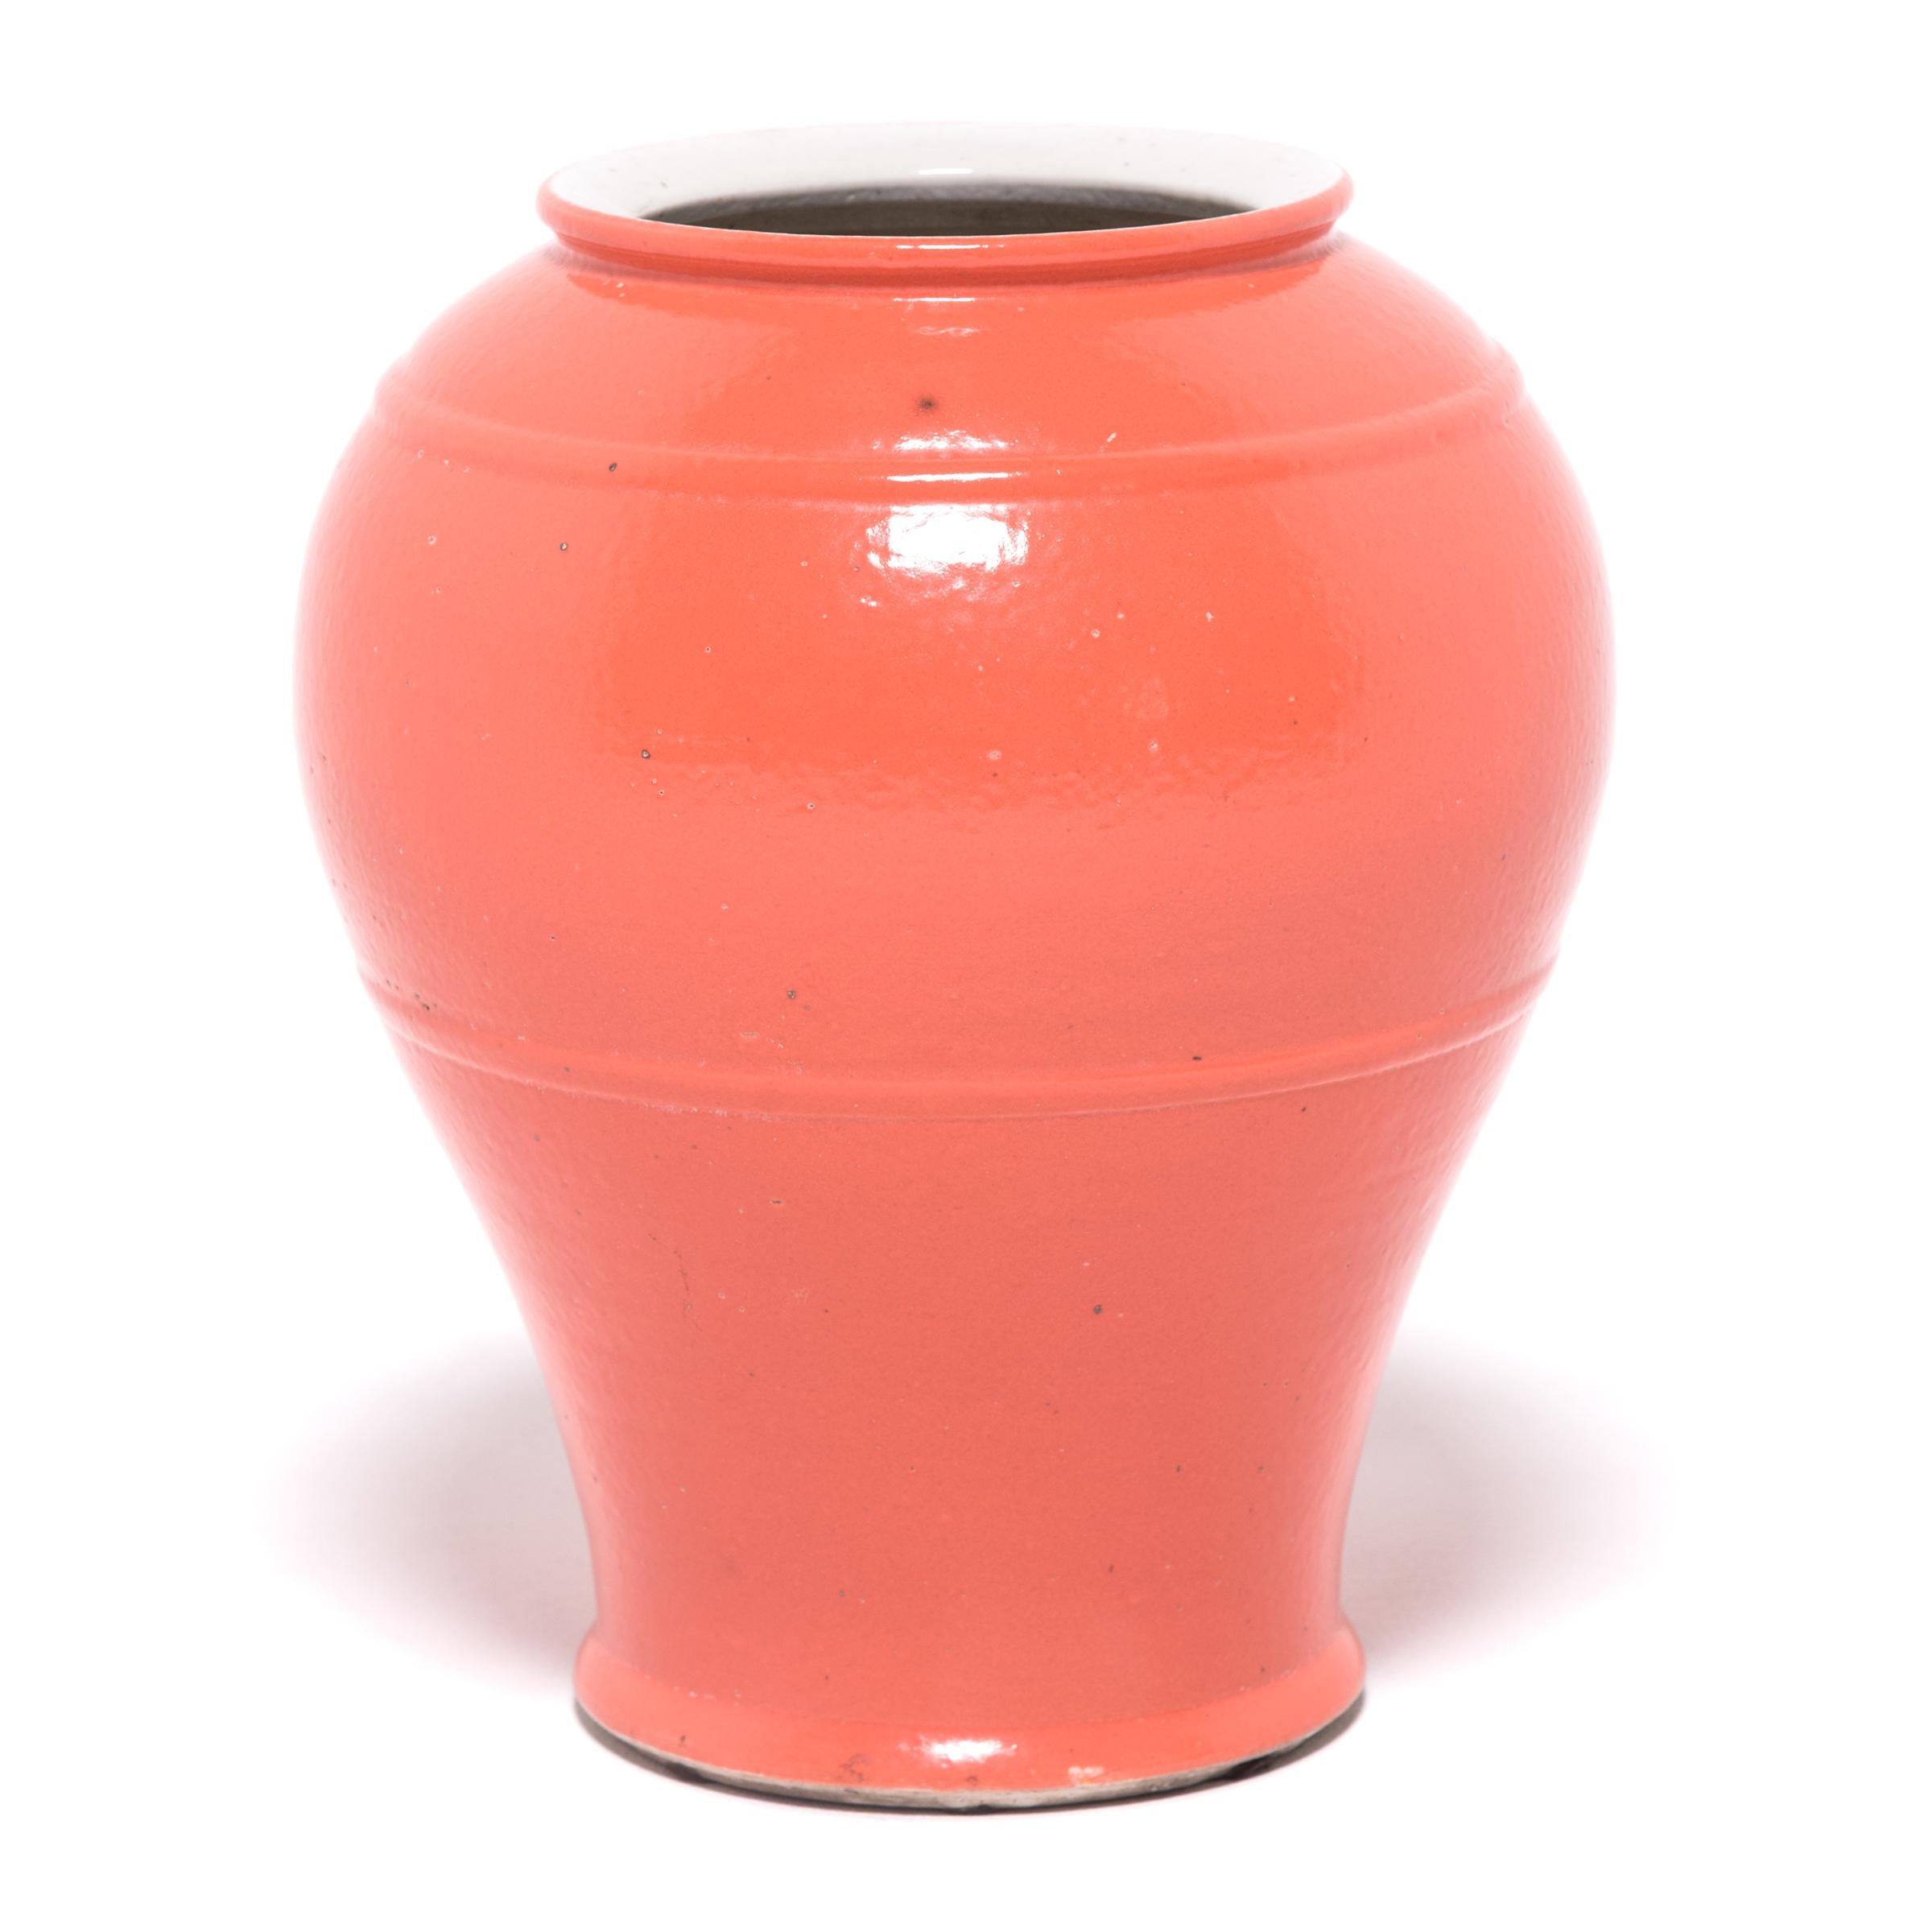 This large tapered vase reinterprets the classic curves of traditional Chinese ceramics with simplified lines and a bright, persimmon-orange glaze. Sculpted by artisans in China's Zhejiang province, the vase has an impressive sculptural form with